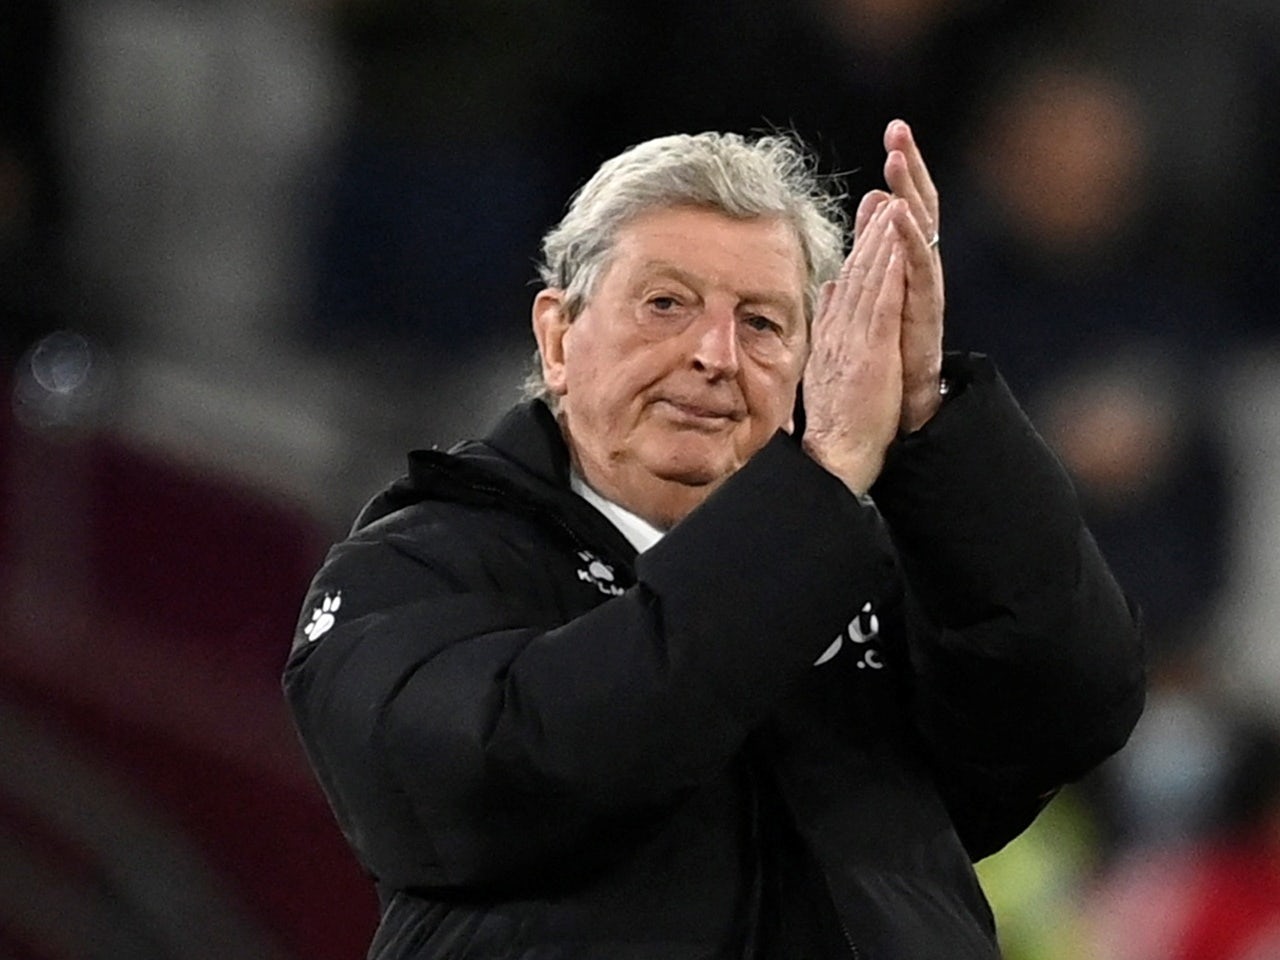 Roy Hodgson says Watford supporters will play a role in relegation battle